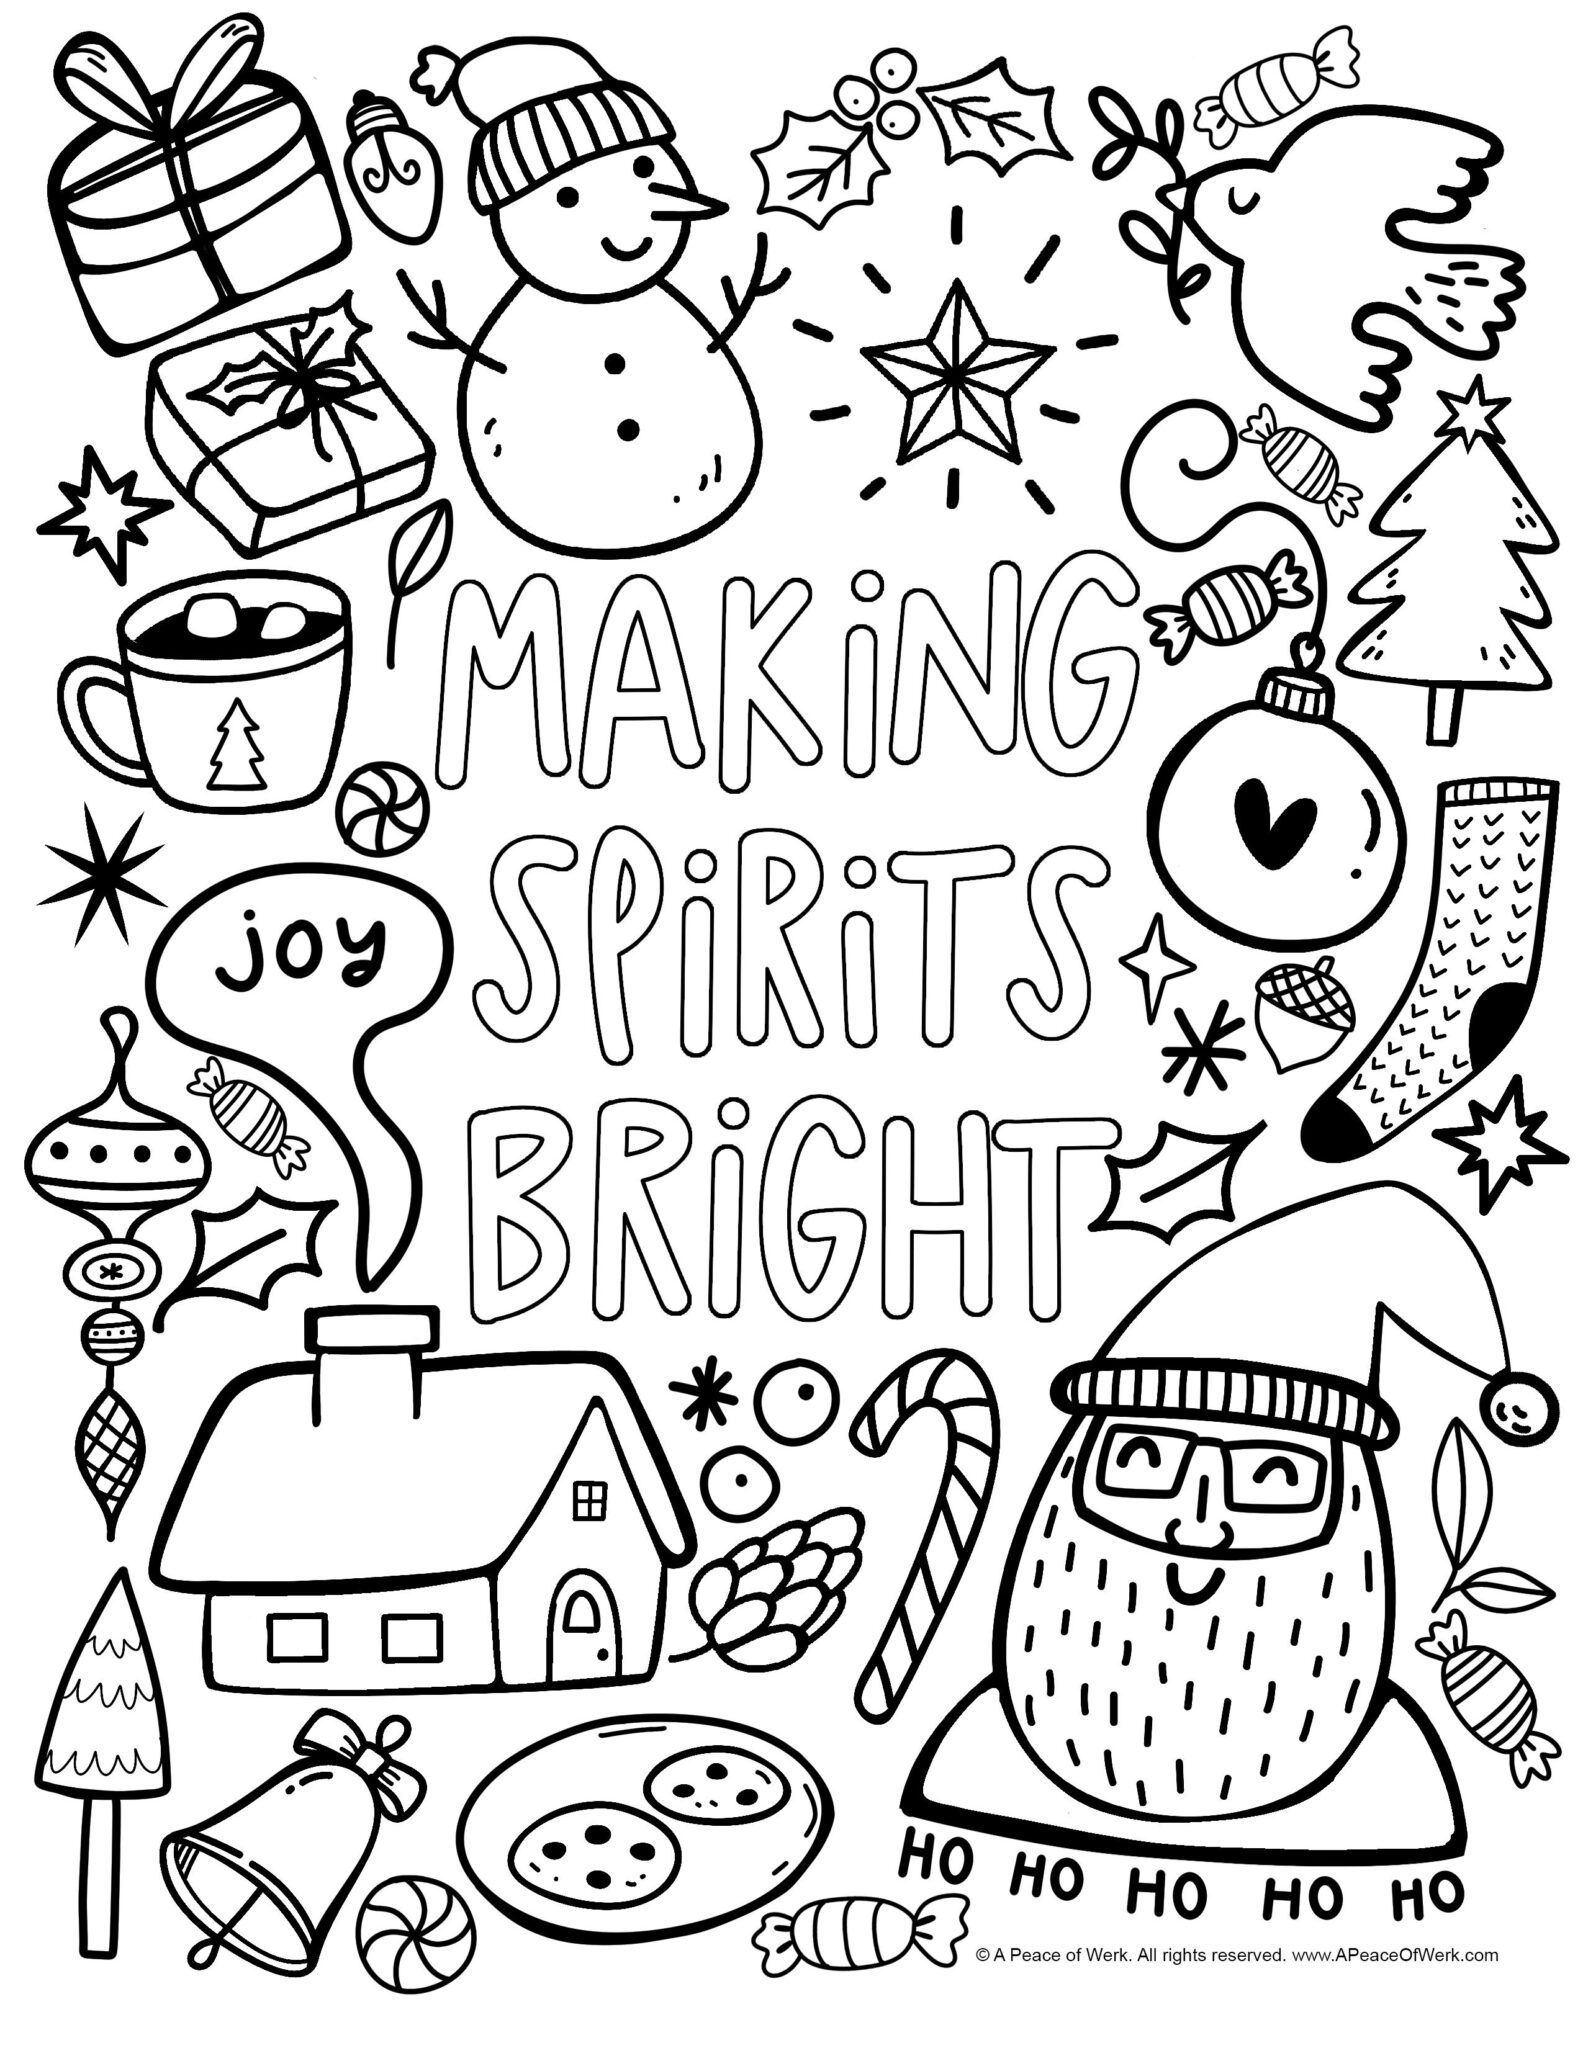 Free Holiday Coloring Sheet - A Peace of Werk By Eliza Todd